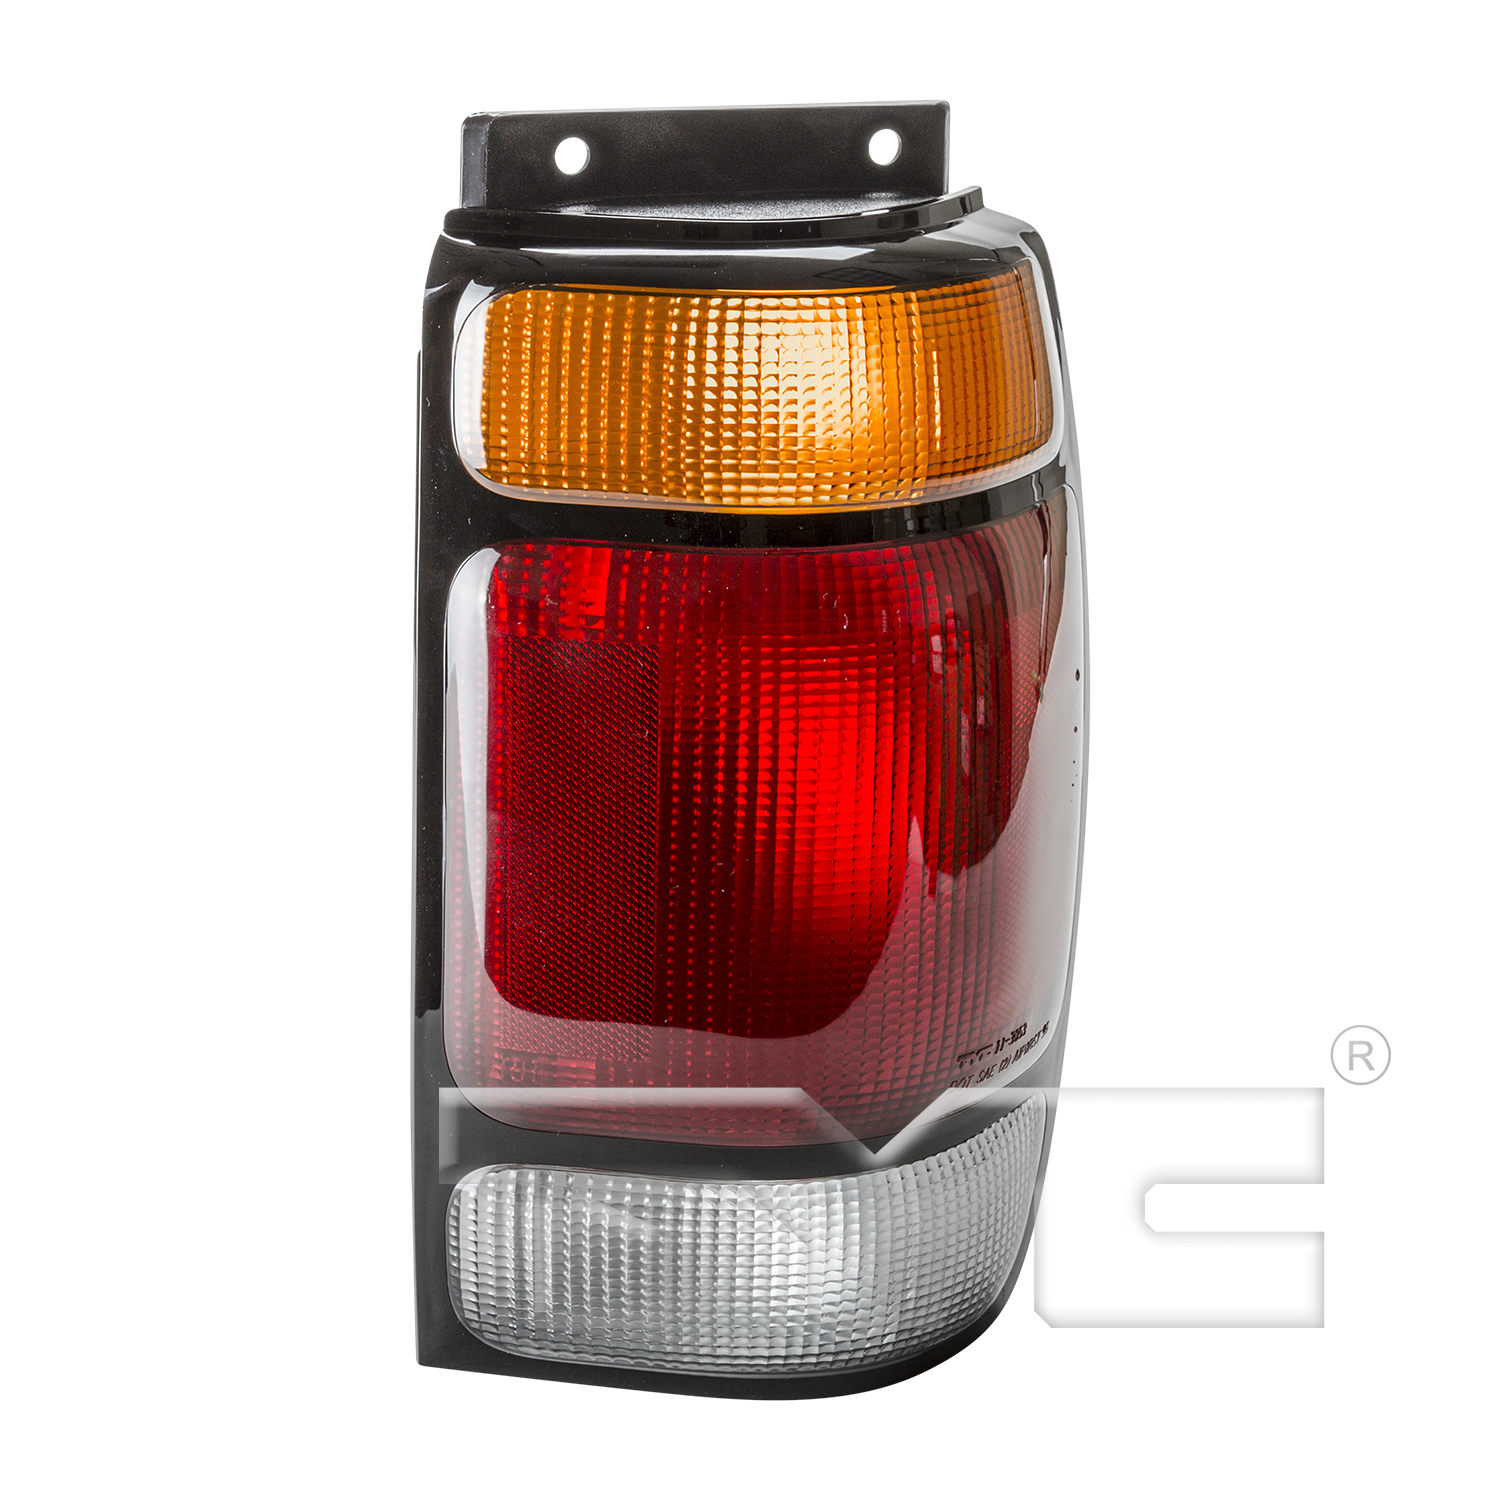 Aftermarket TAILLIGHTS for FORD - EXPLORER, EXPLORER,95-97,RT Taillamp assy